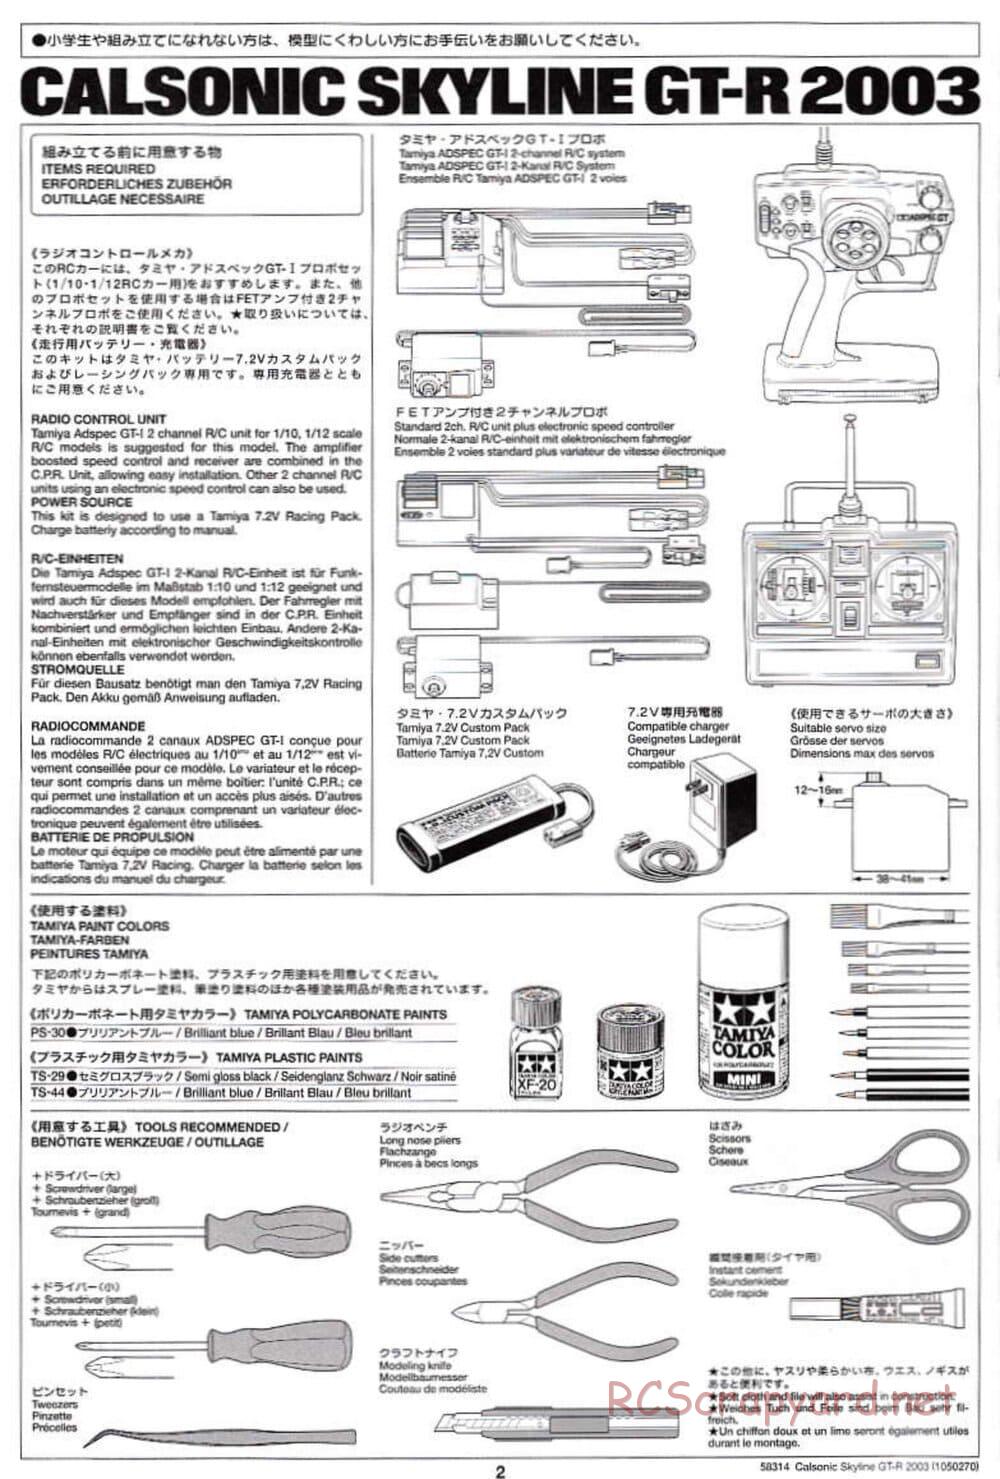 Tamiya - Calsonic Skyline GT-R 2003 - TT-01 Chassis - Manual - Page 2